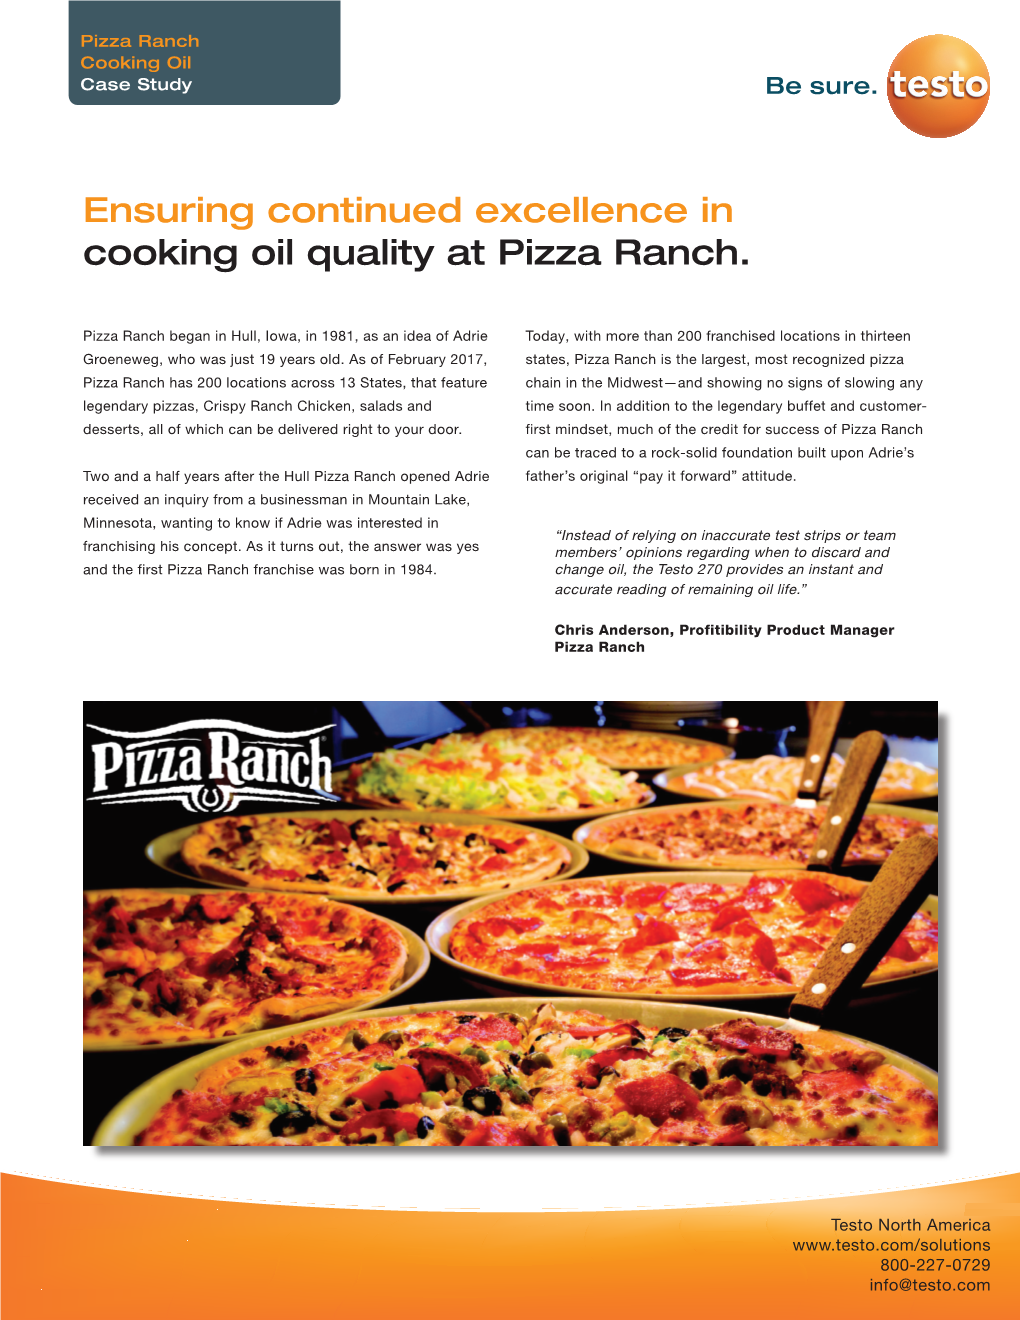 Ensuring Continued Excellence in Cooking Oil Quality at Pizza Ranch